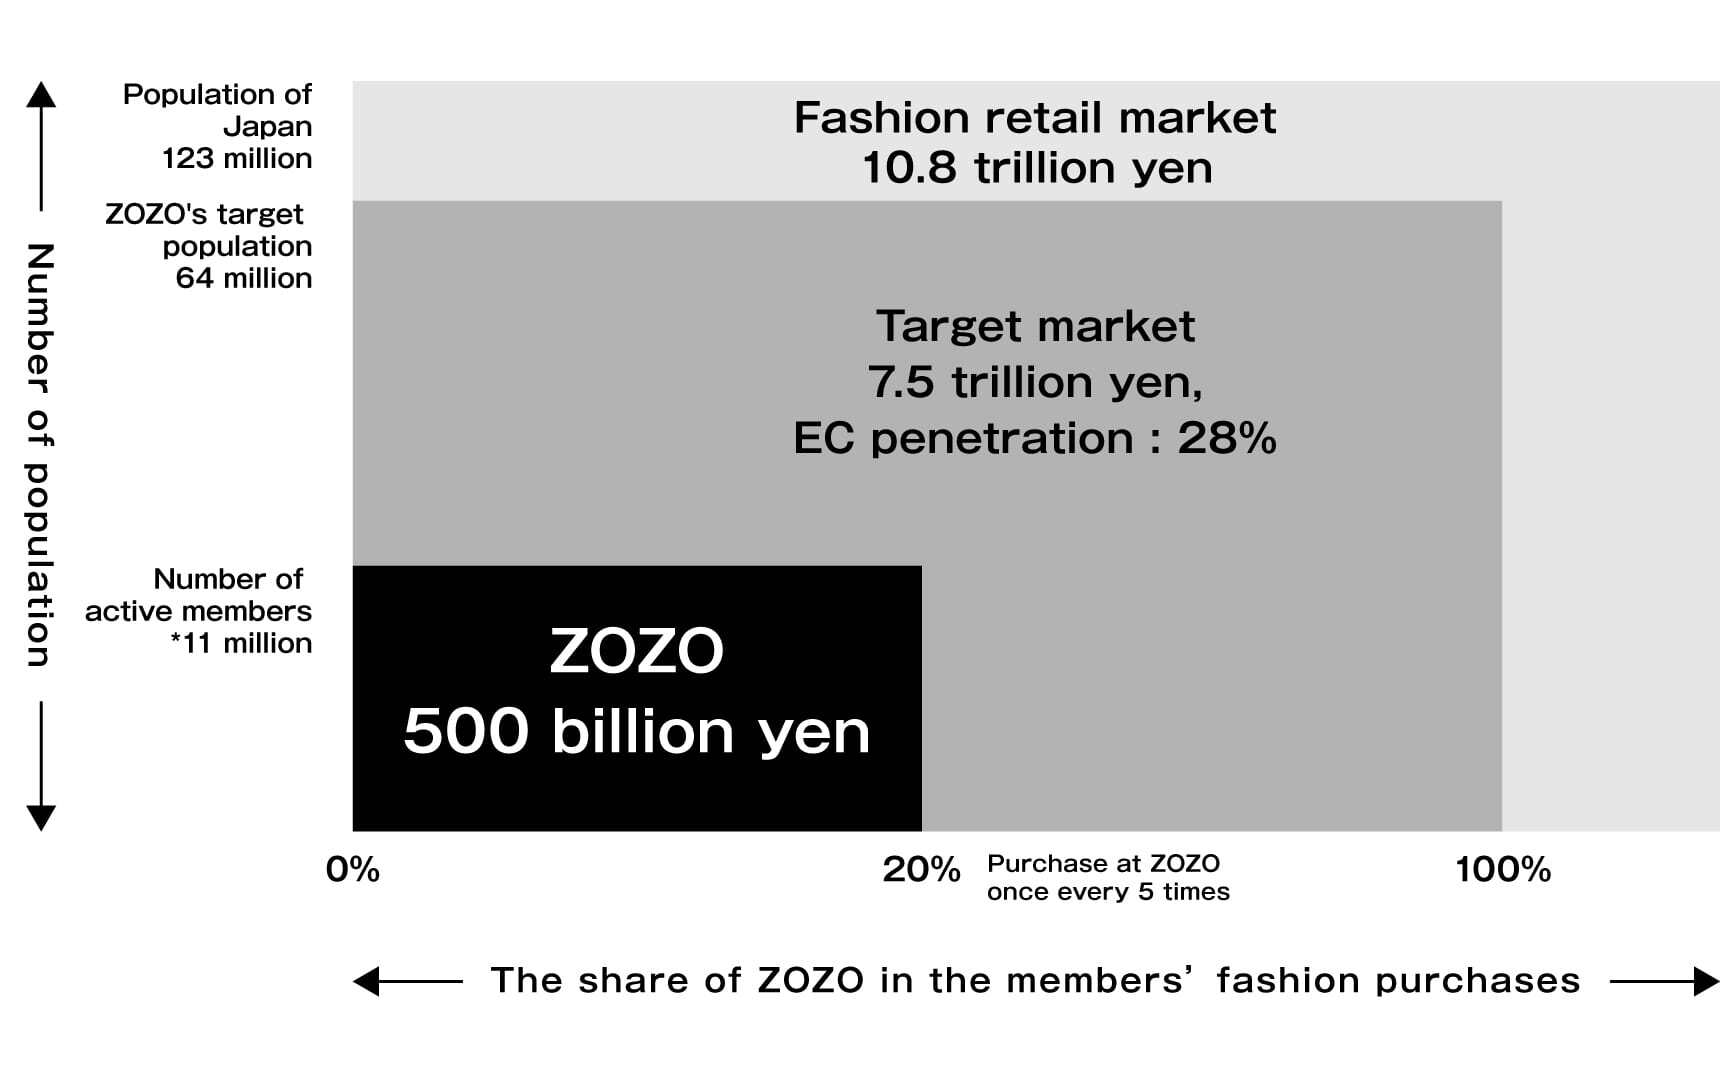 Current market share in the fashion retail market